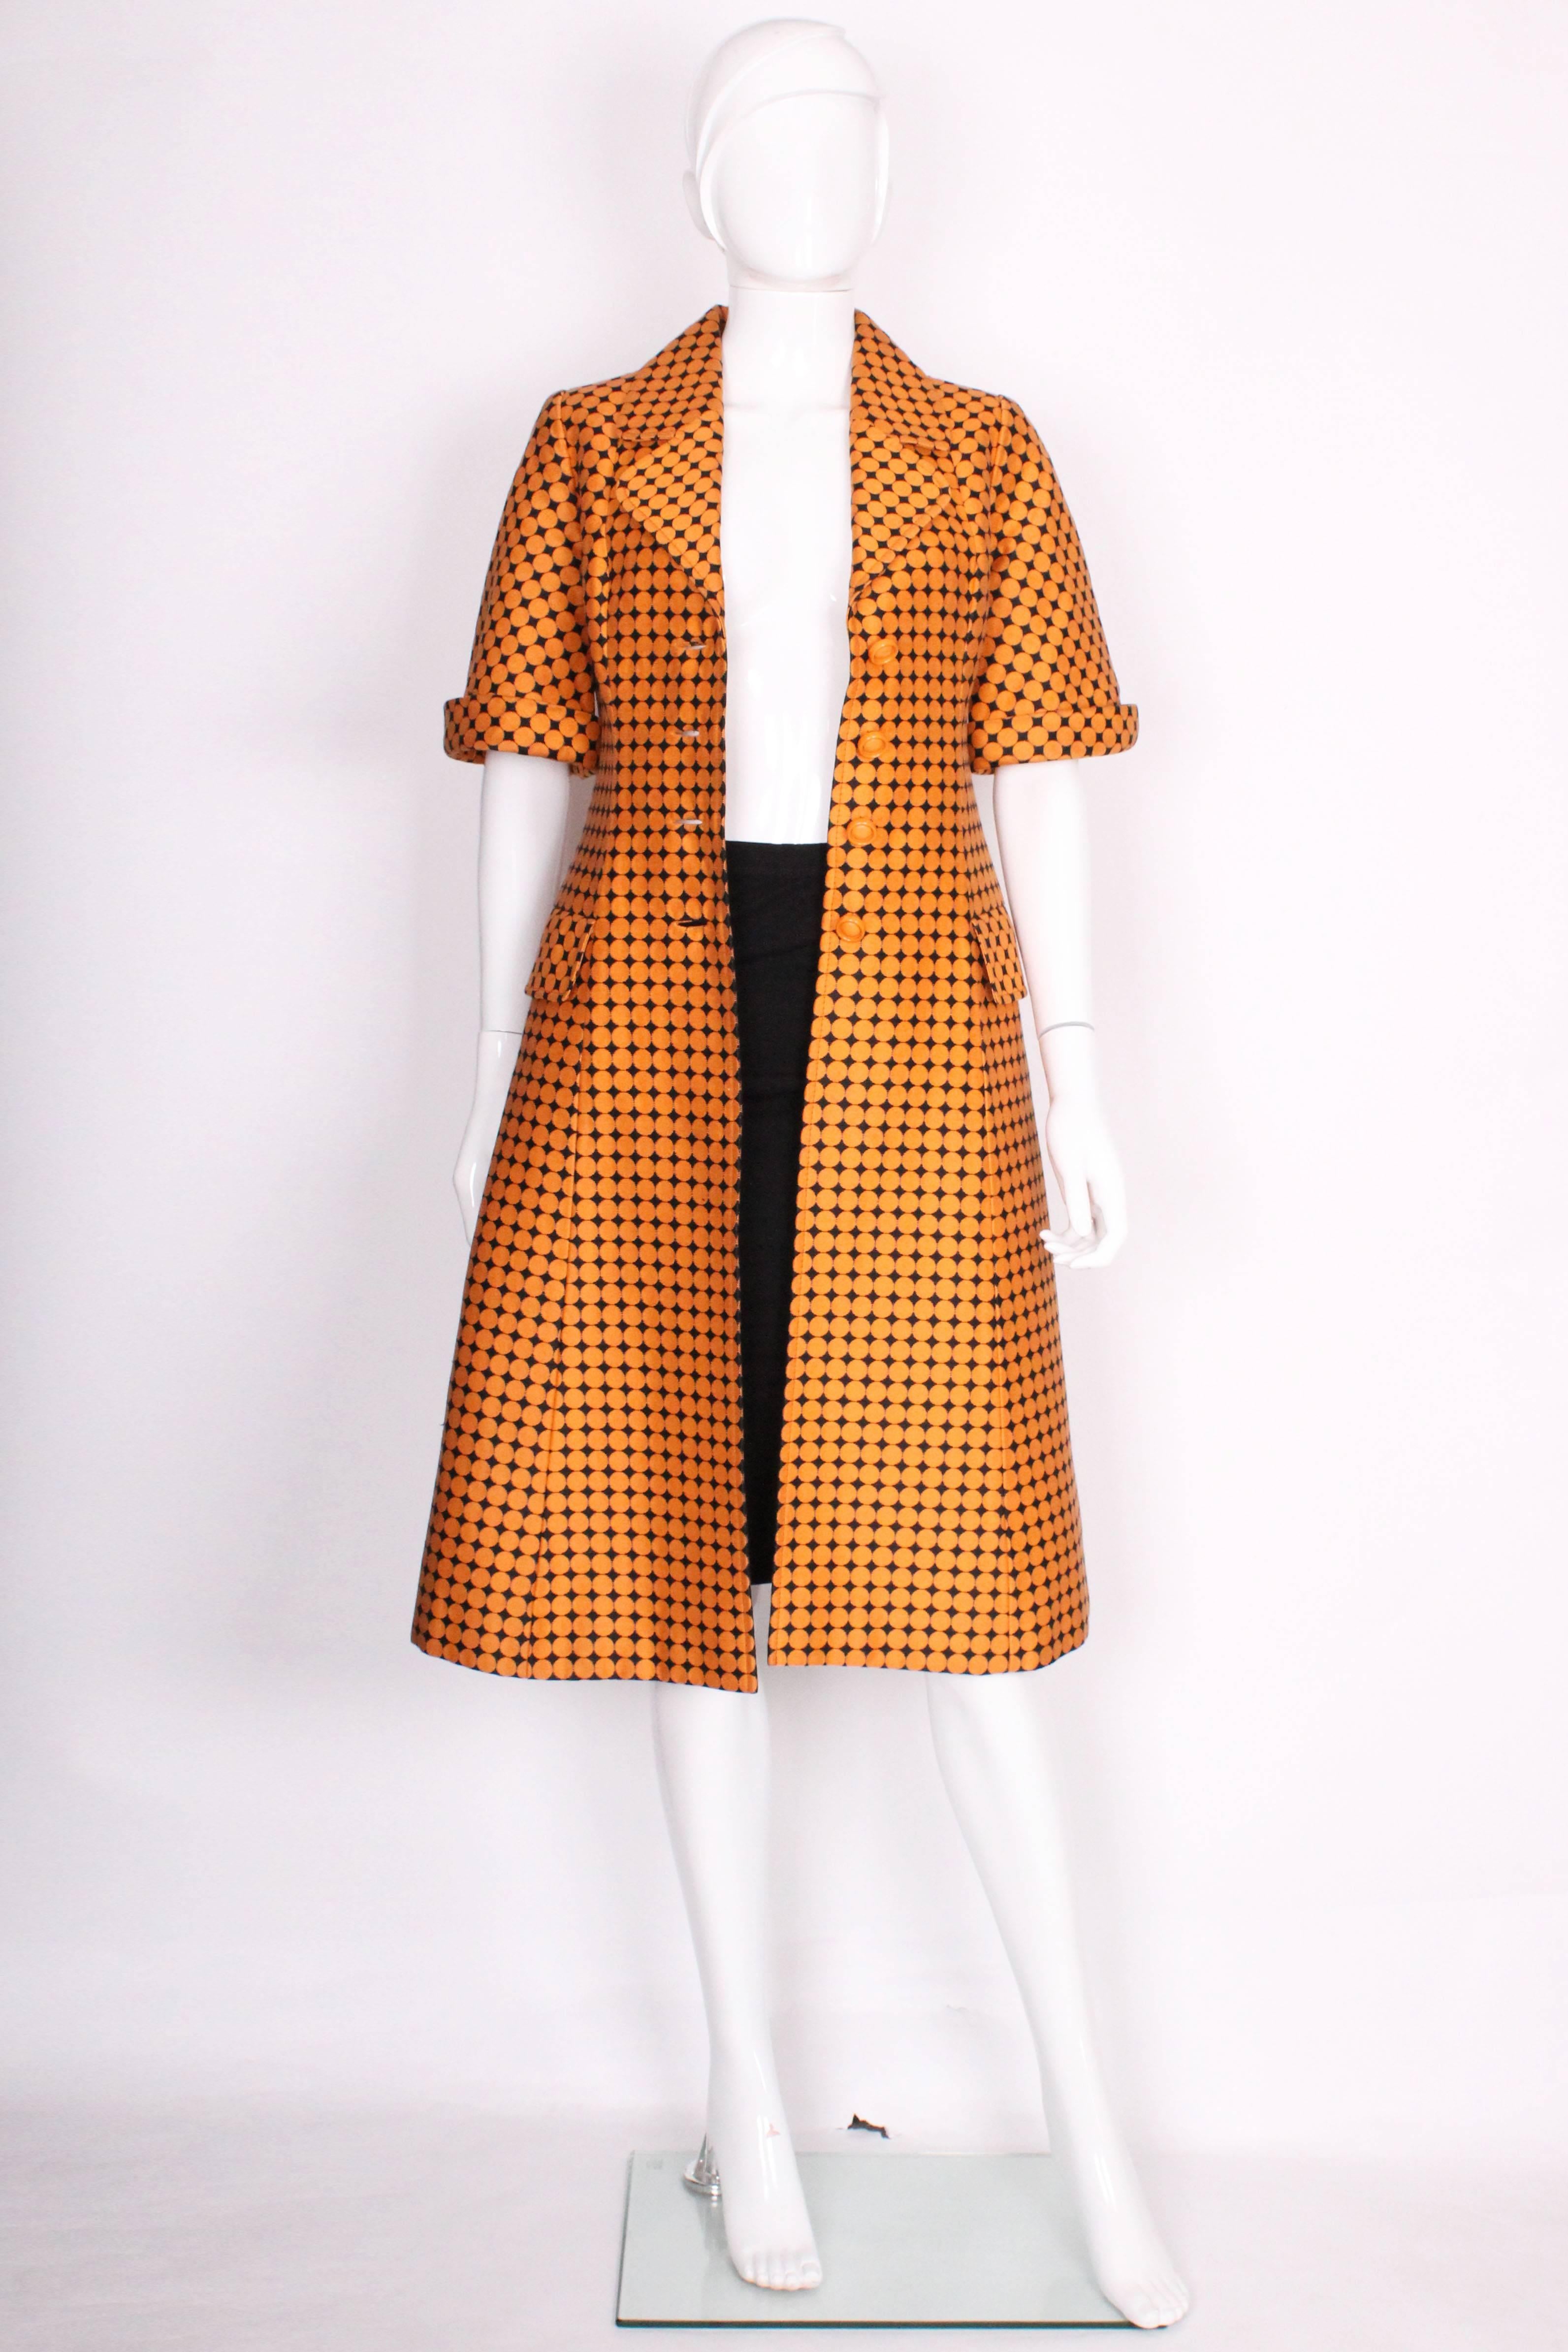 A chic and bold coat dress made for Marshall and Snelgrove by IFL Couture in Switzerland. The coat has a black background and large orange dots that. It has a large double lapel collar and 4 round orange buttons down the center that closes the coat